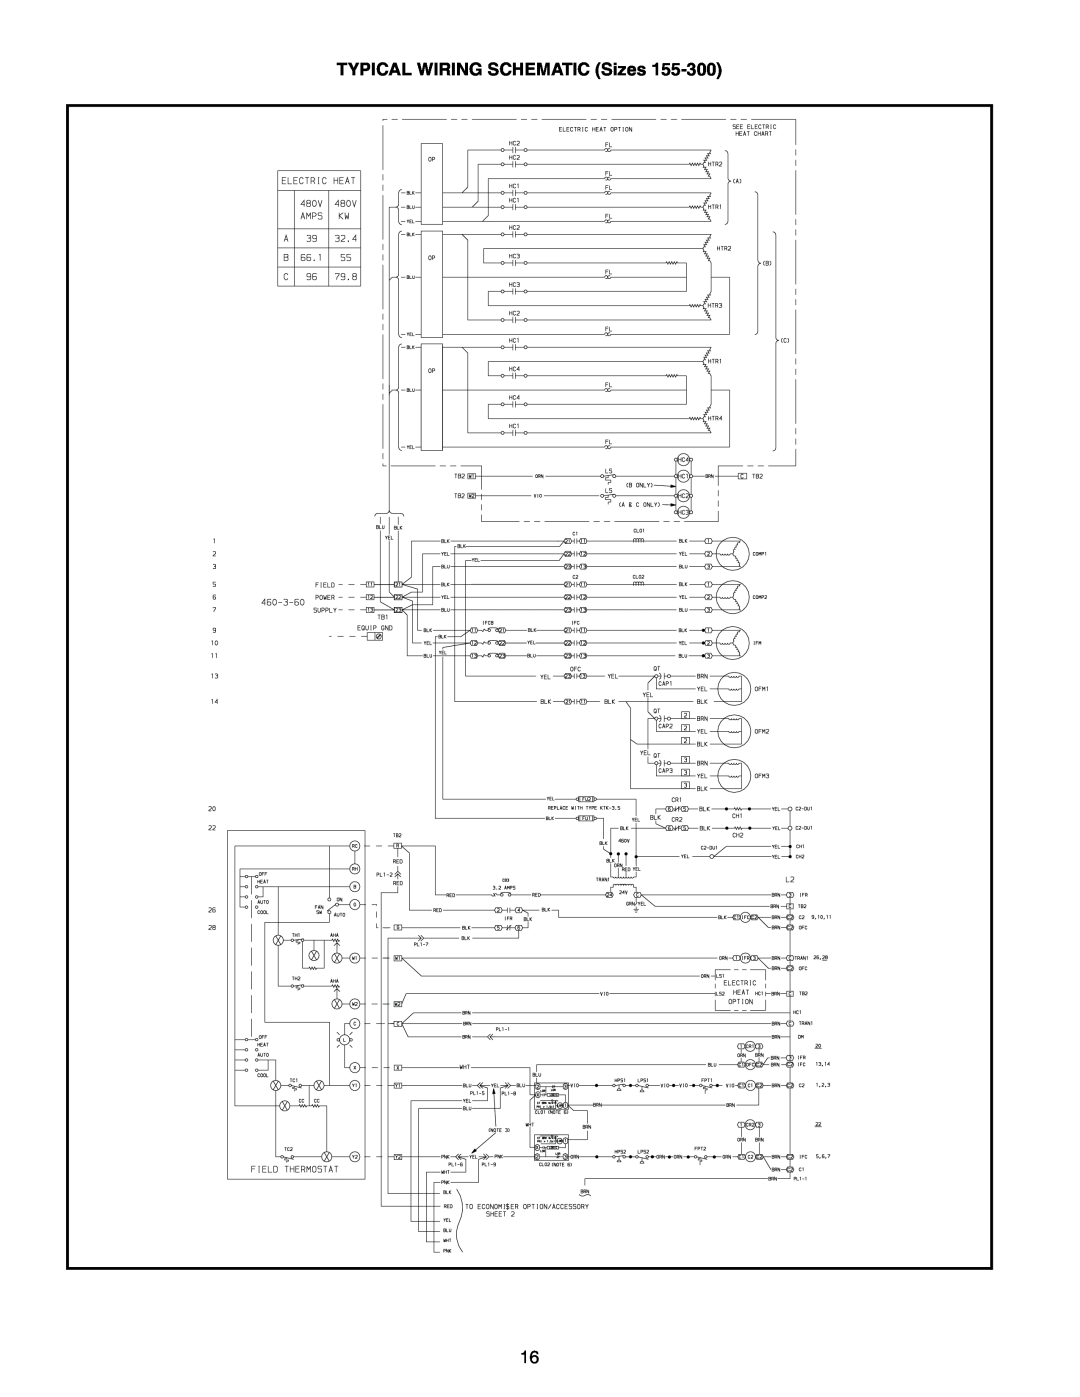 Bryant 551B, 558F, 551A manual TYPICAL WIRING SCHEMATIC Sizes 